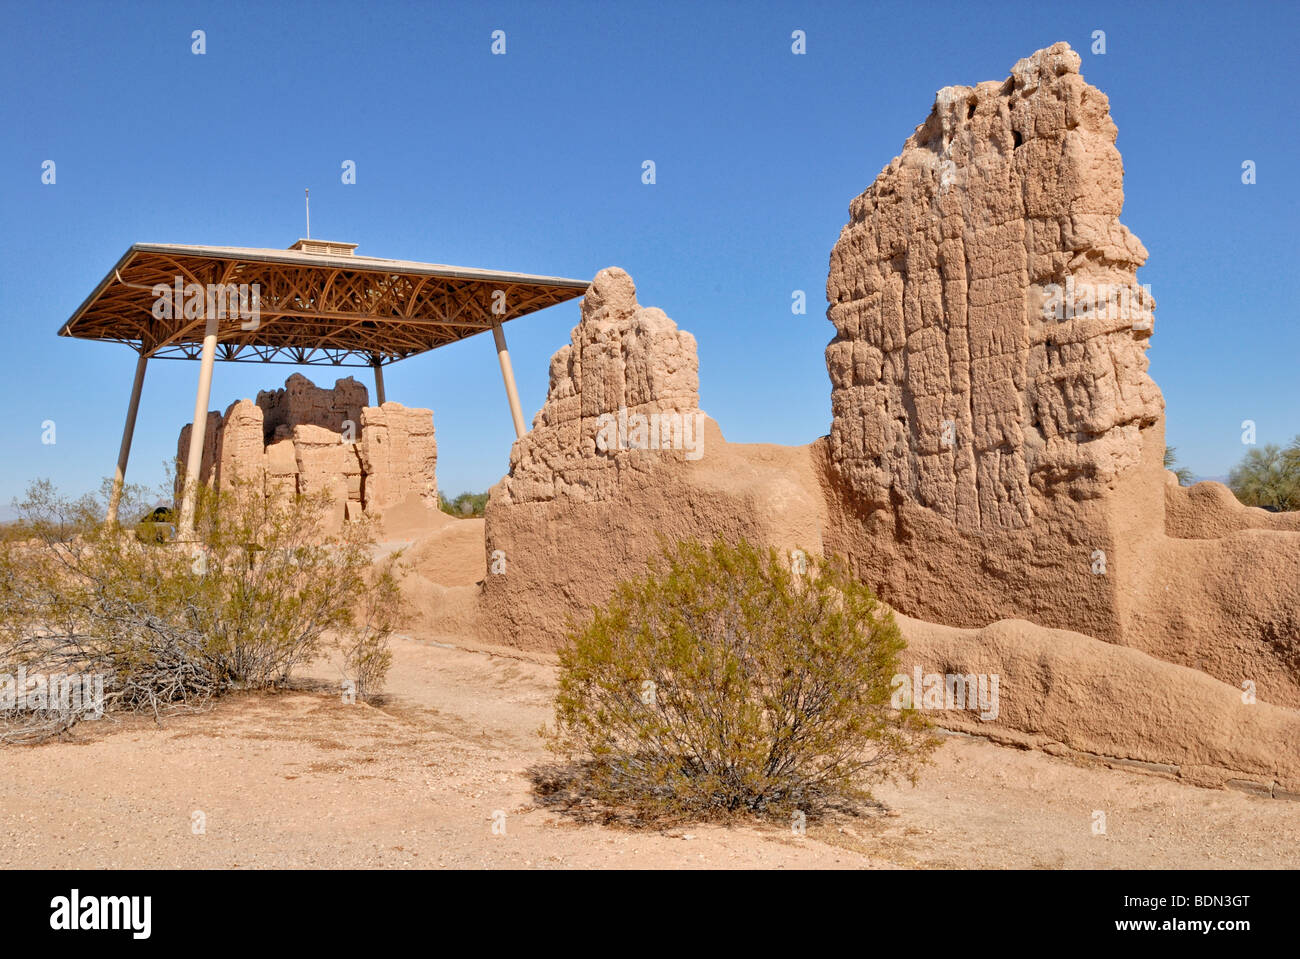 Remains of historic buildings of the Hohokam Indians, made of wattle and mortar, from around 1300 AD, Casa Grande Ruins Nationa Stock Photo